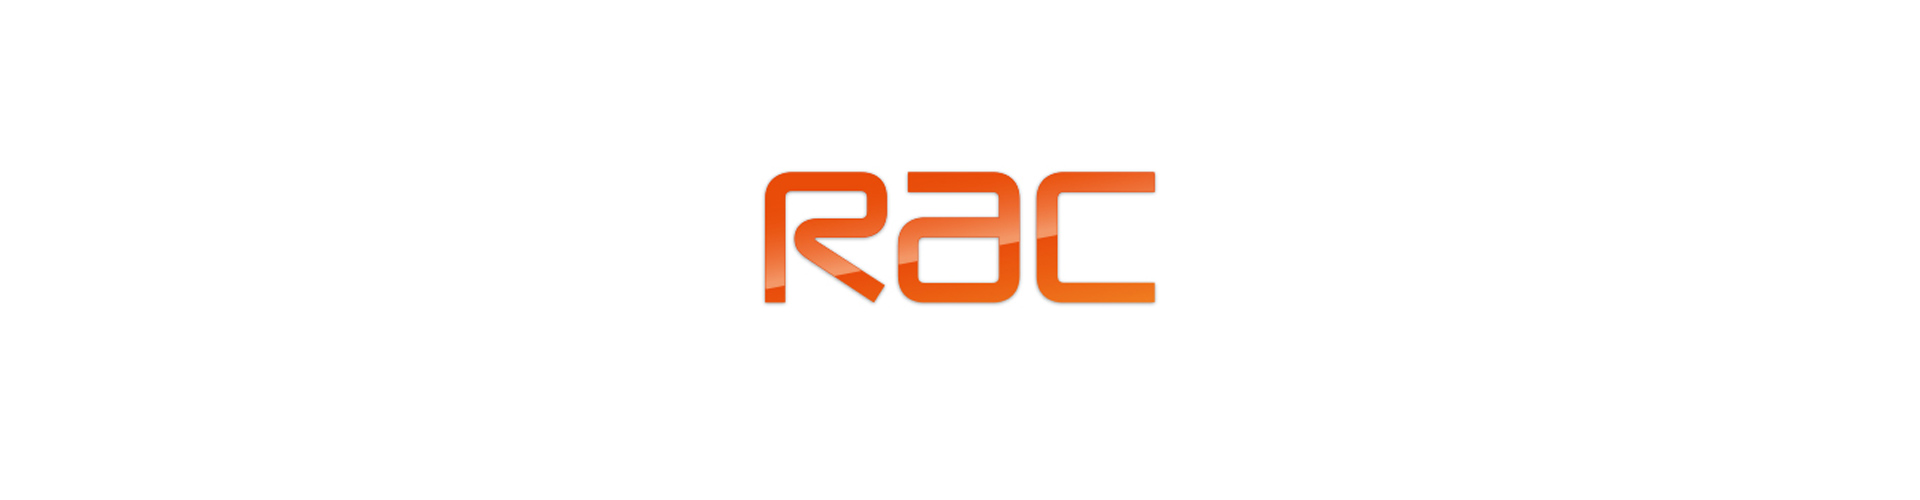 RAC appoints Hood Group to launch its new travel insurance product